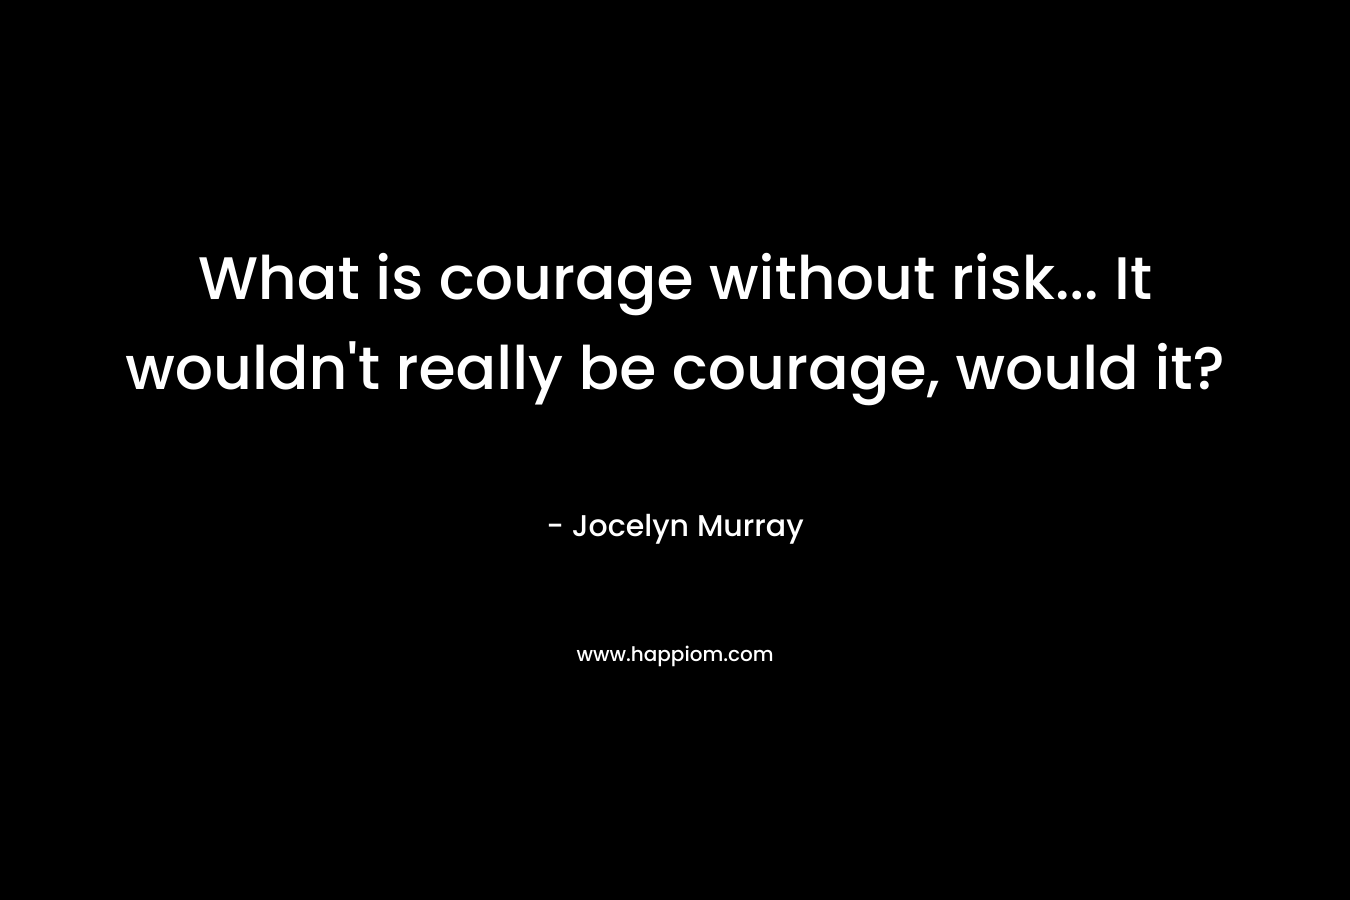 What is courage without risk... It wouldn't really be courage, would it?